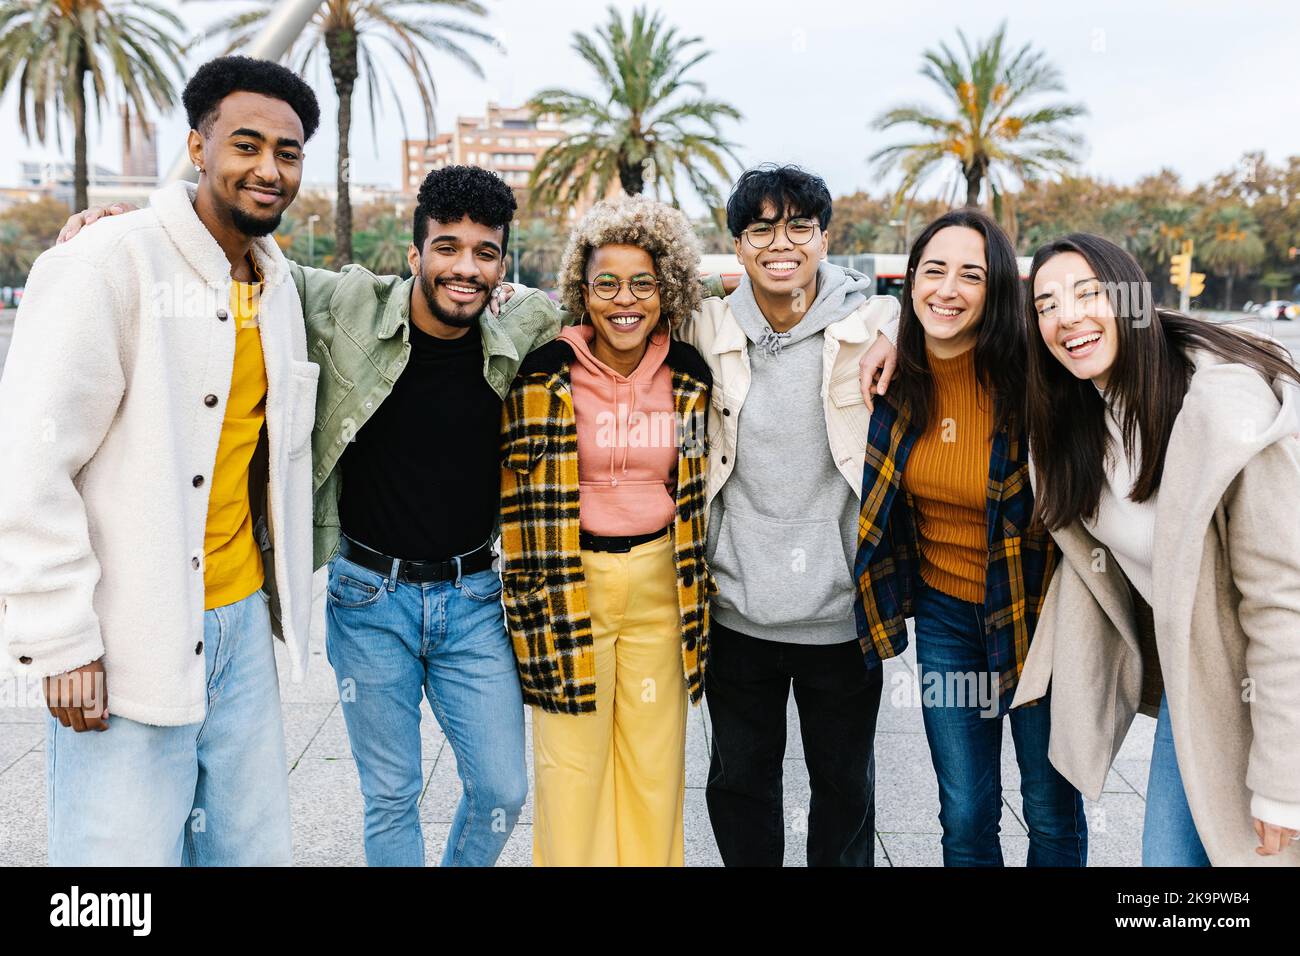 Group portrait of multi-ethnic young best friends smiling at camera in Barcelona Stock Photo